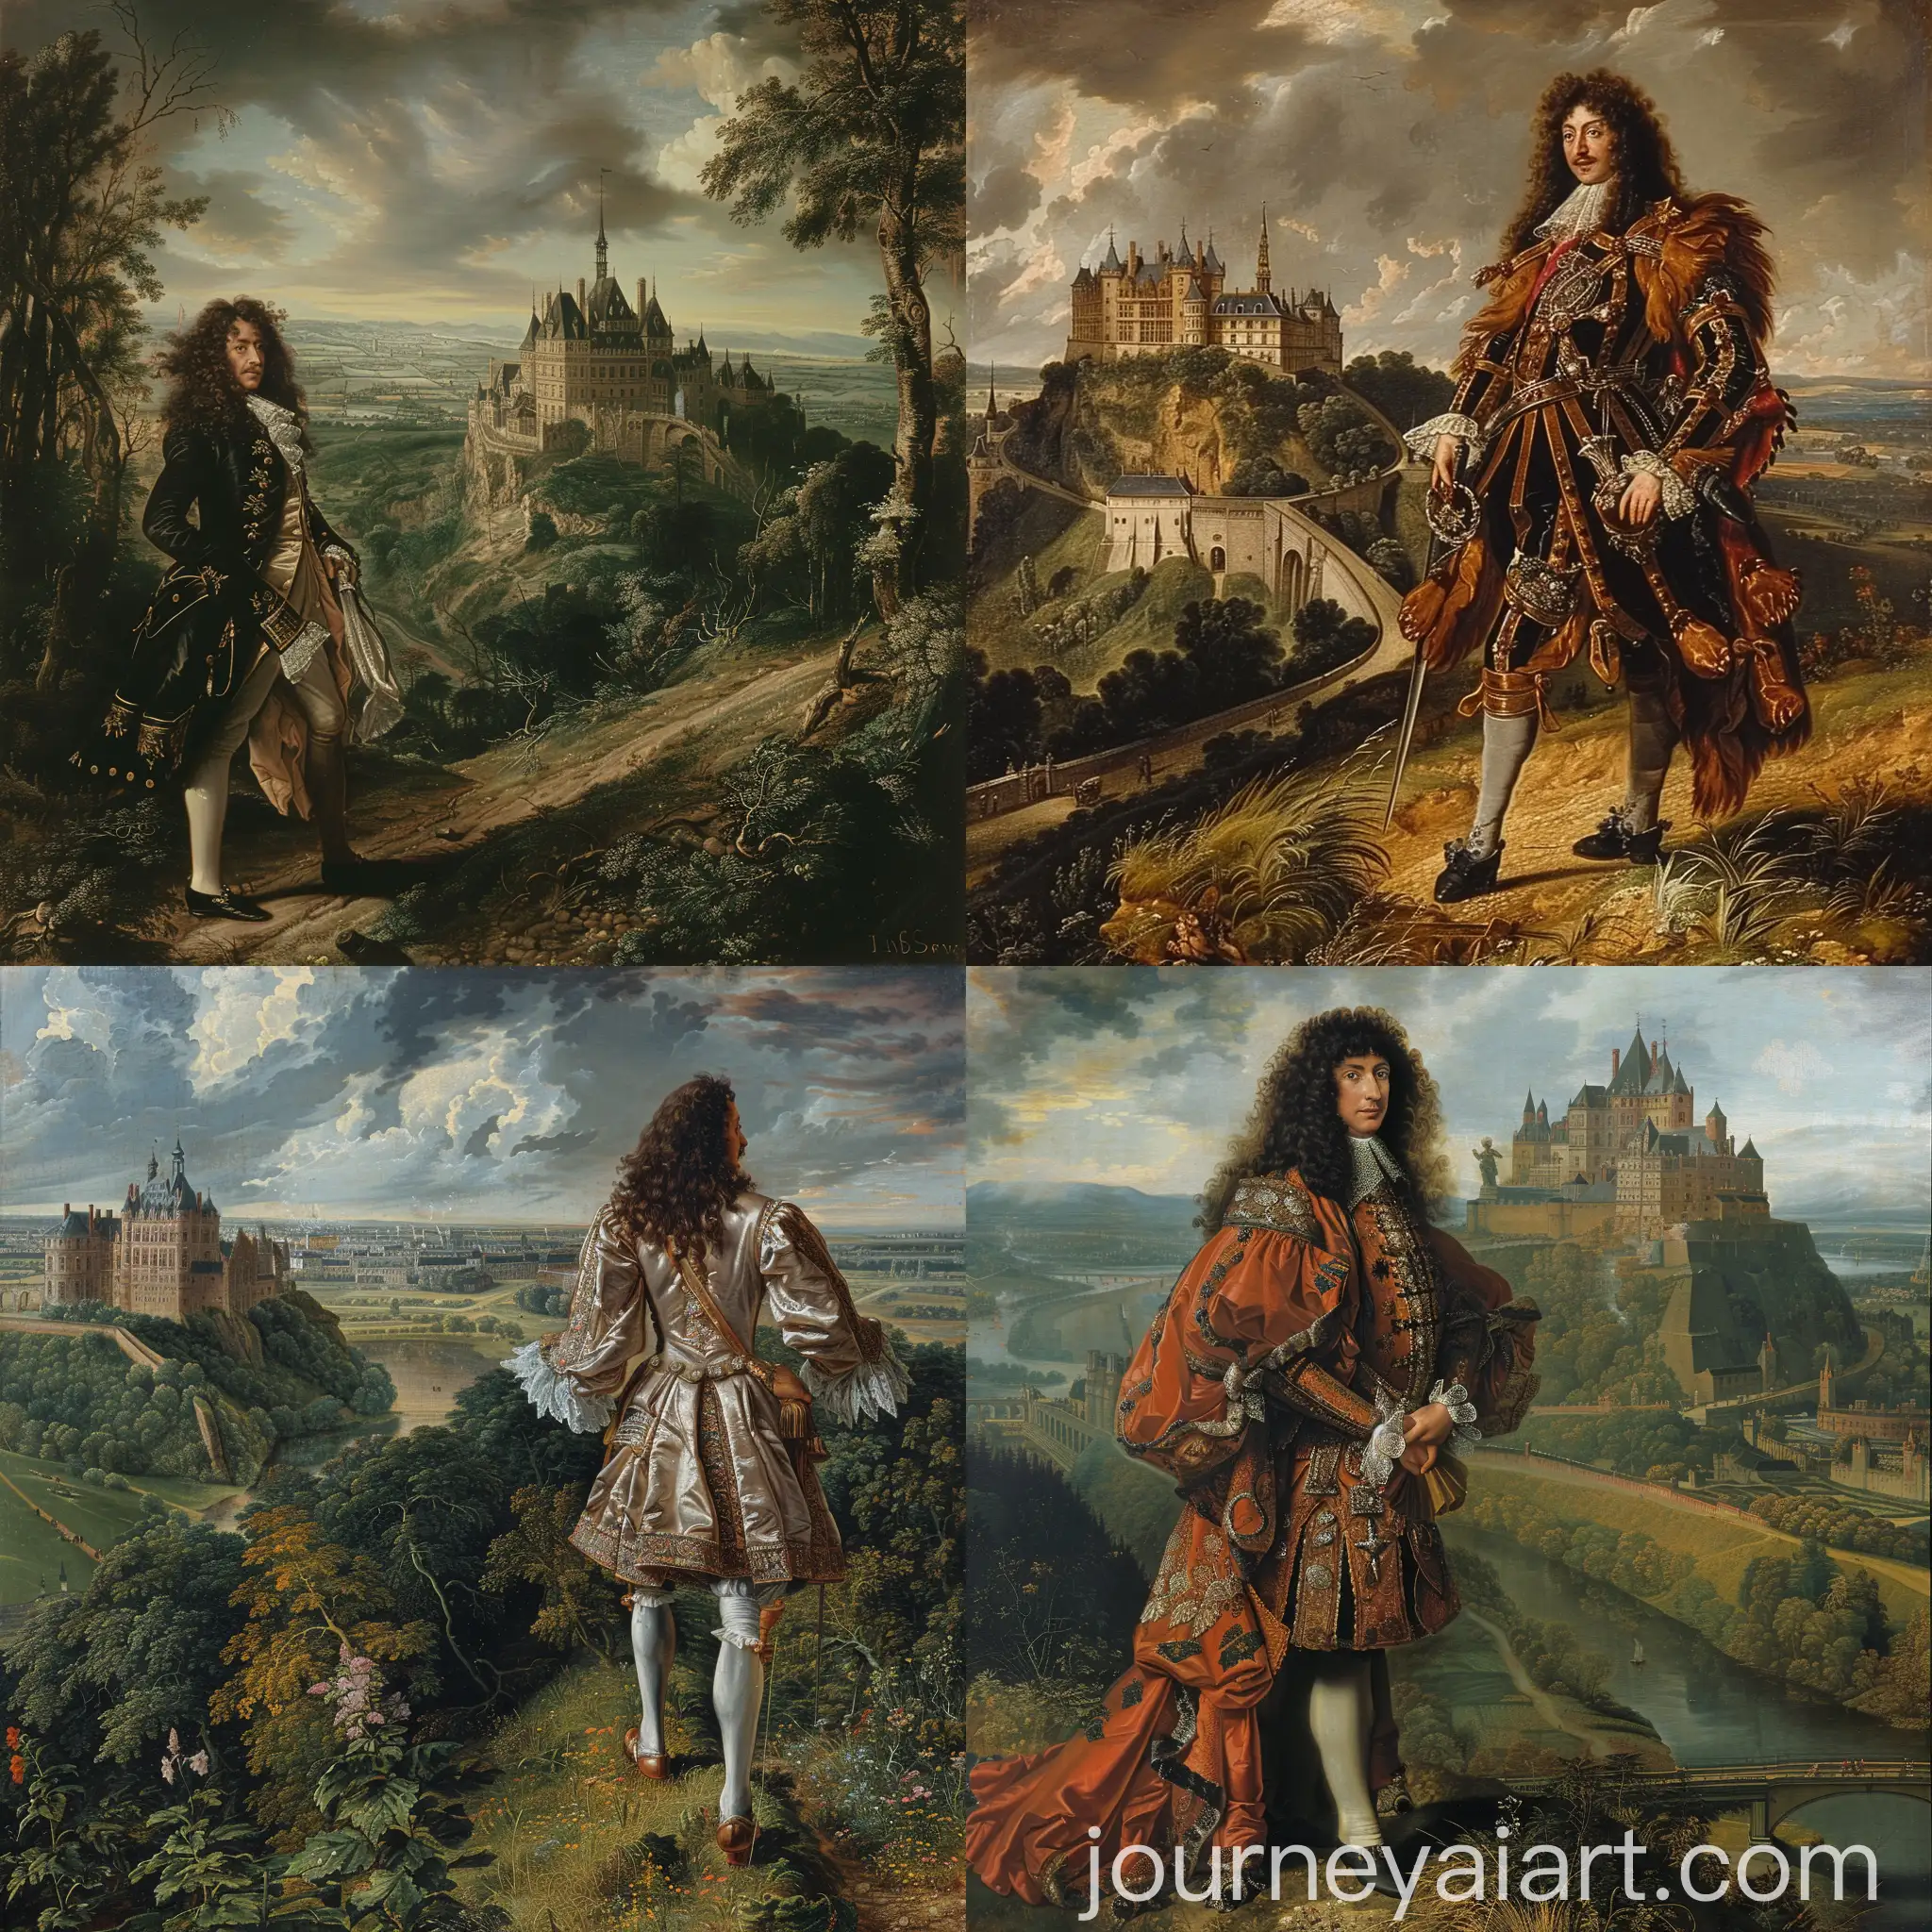 Louis-XIV-Fleeing-Cities-on-Grassy-Road-with-Castle-Background